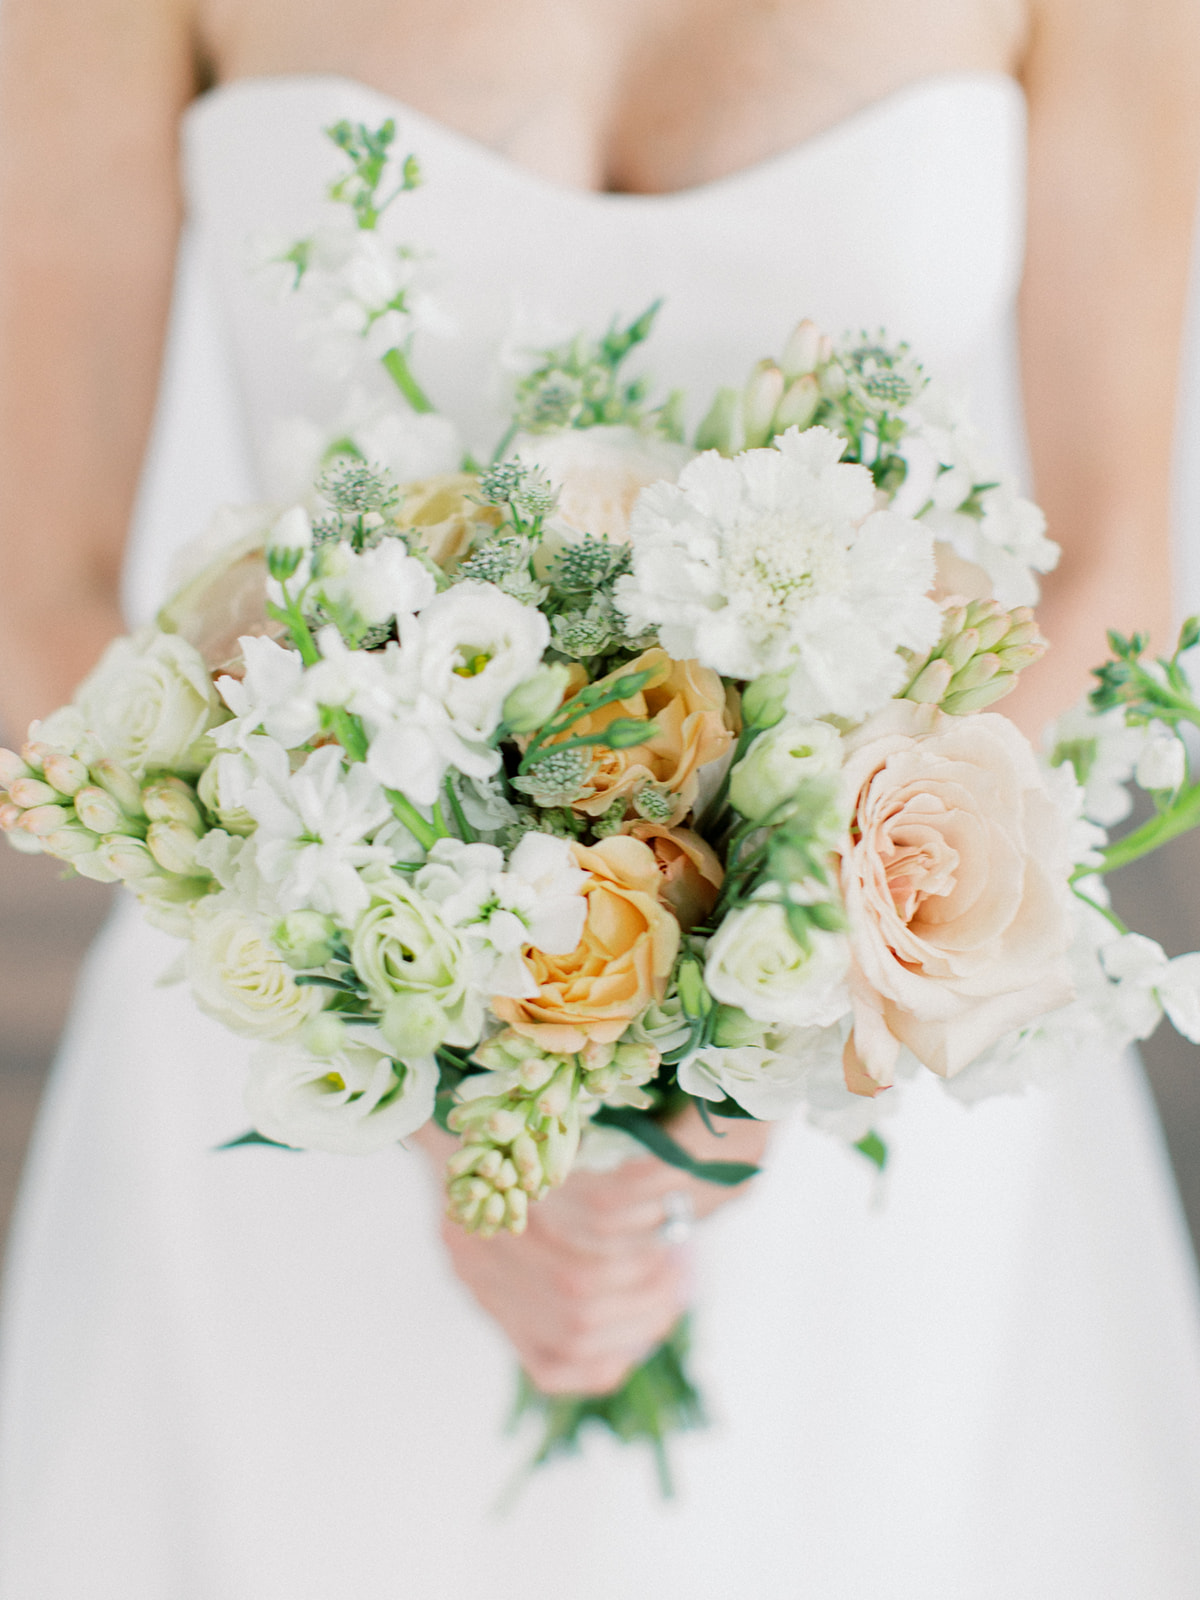 Wedding bouquet inspiration: Clean & Modern Styled Shoot at 14TENN featured on Nashville Bride Guide